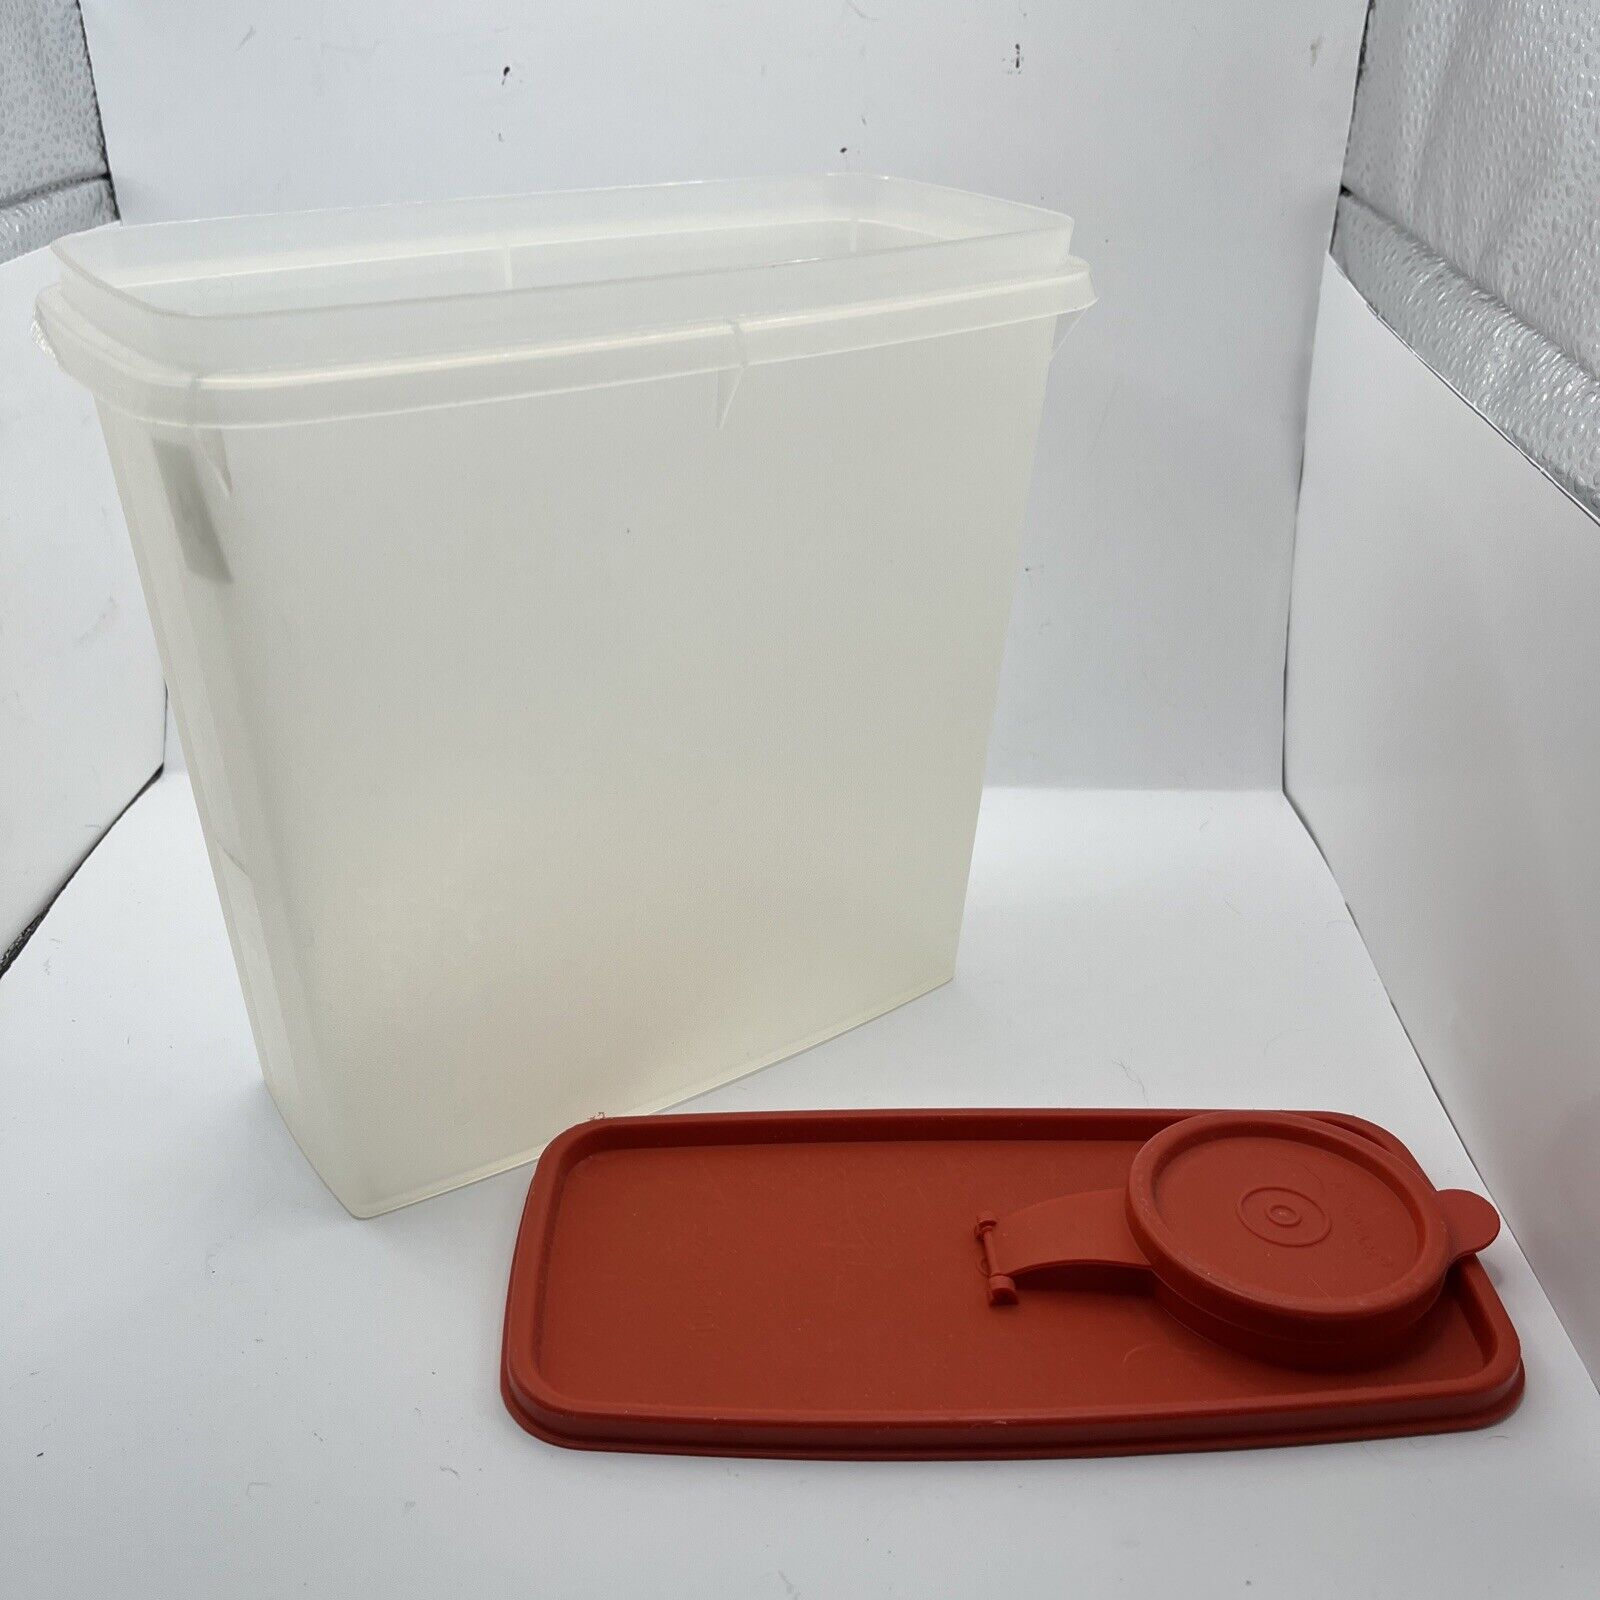 Vintage Tupperware Cereal Keeper 469-21 Storage Container Clear W Lid